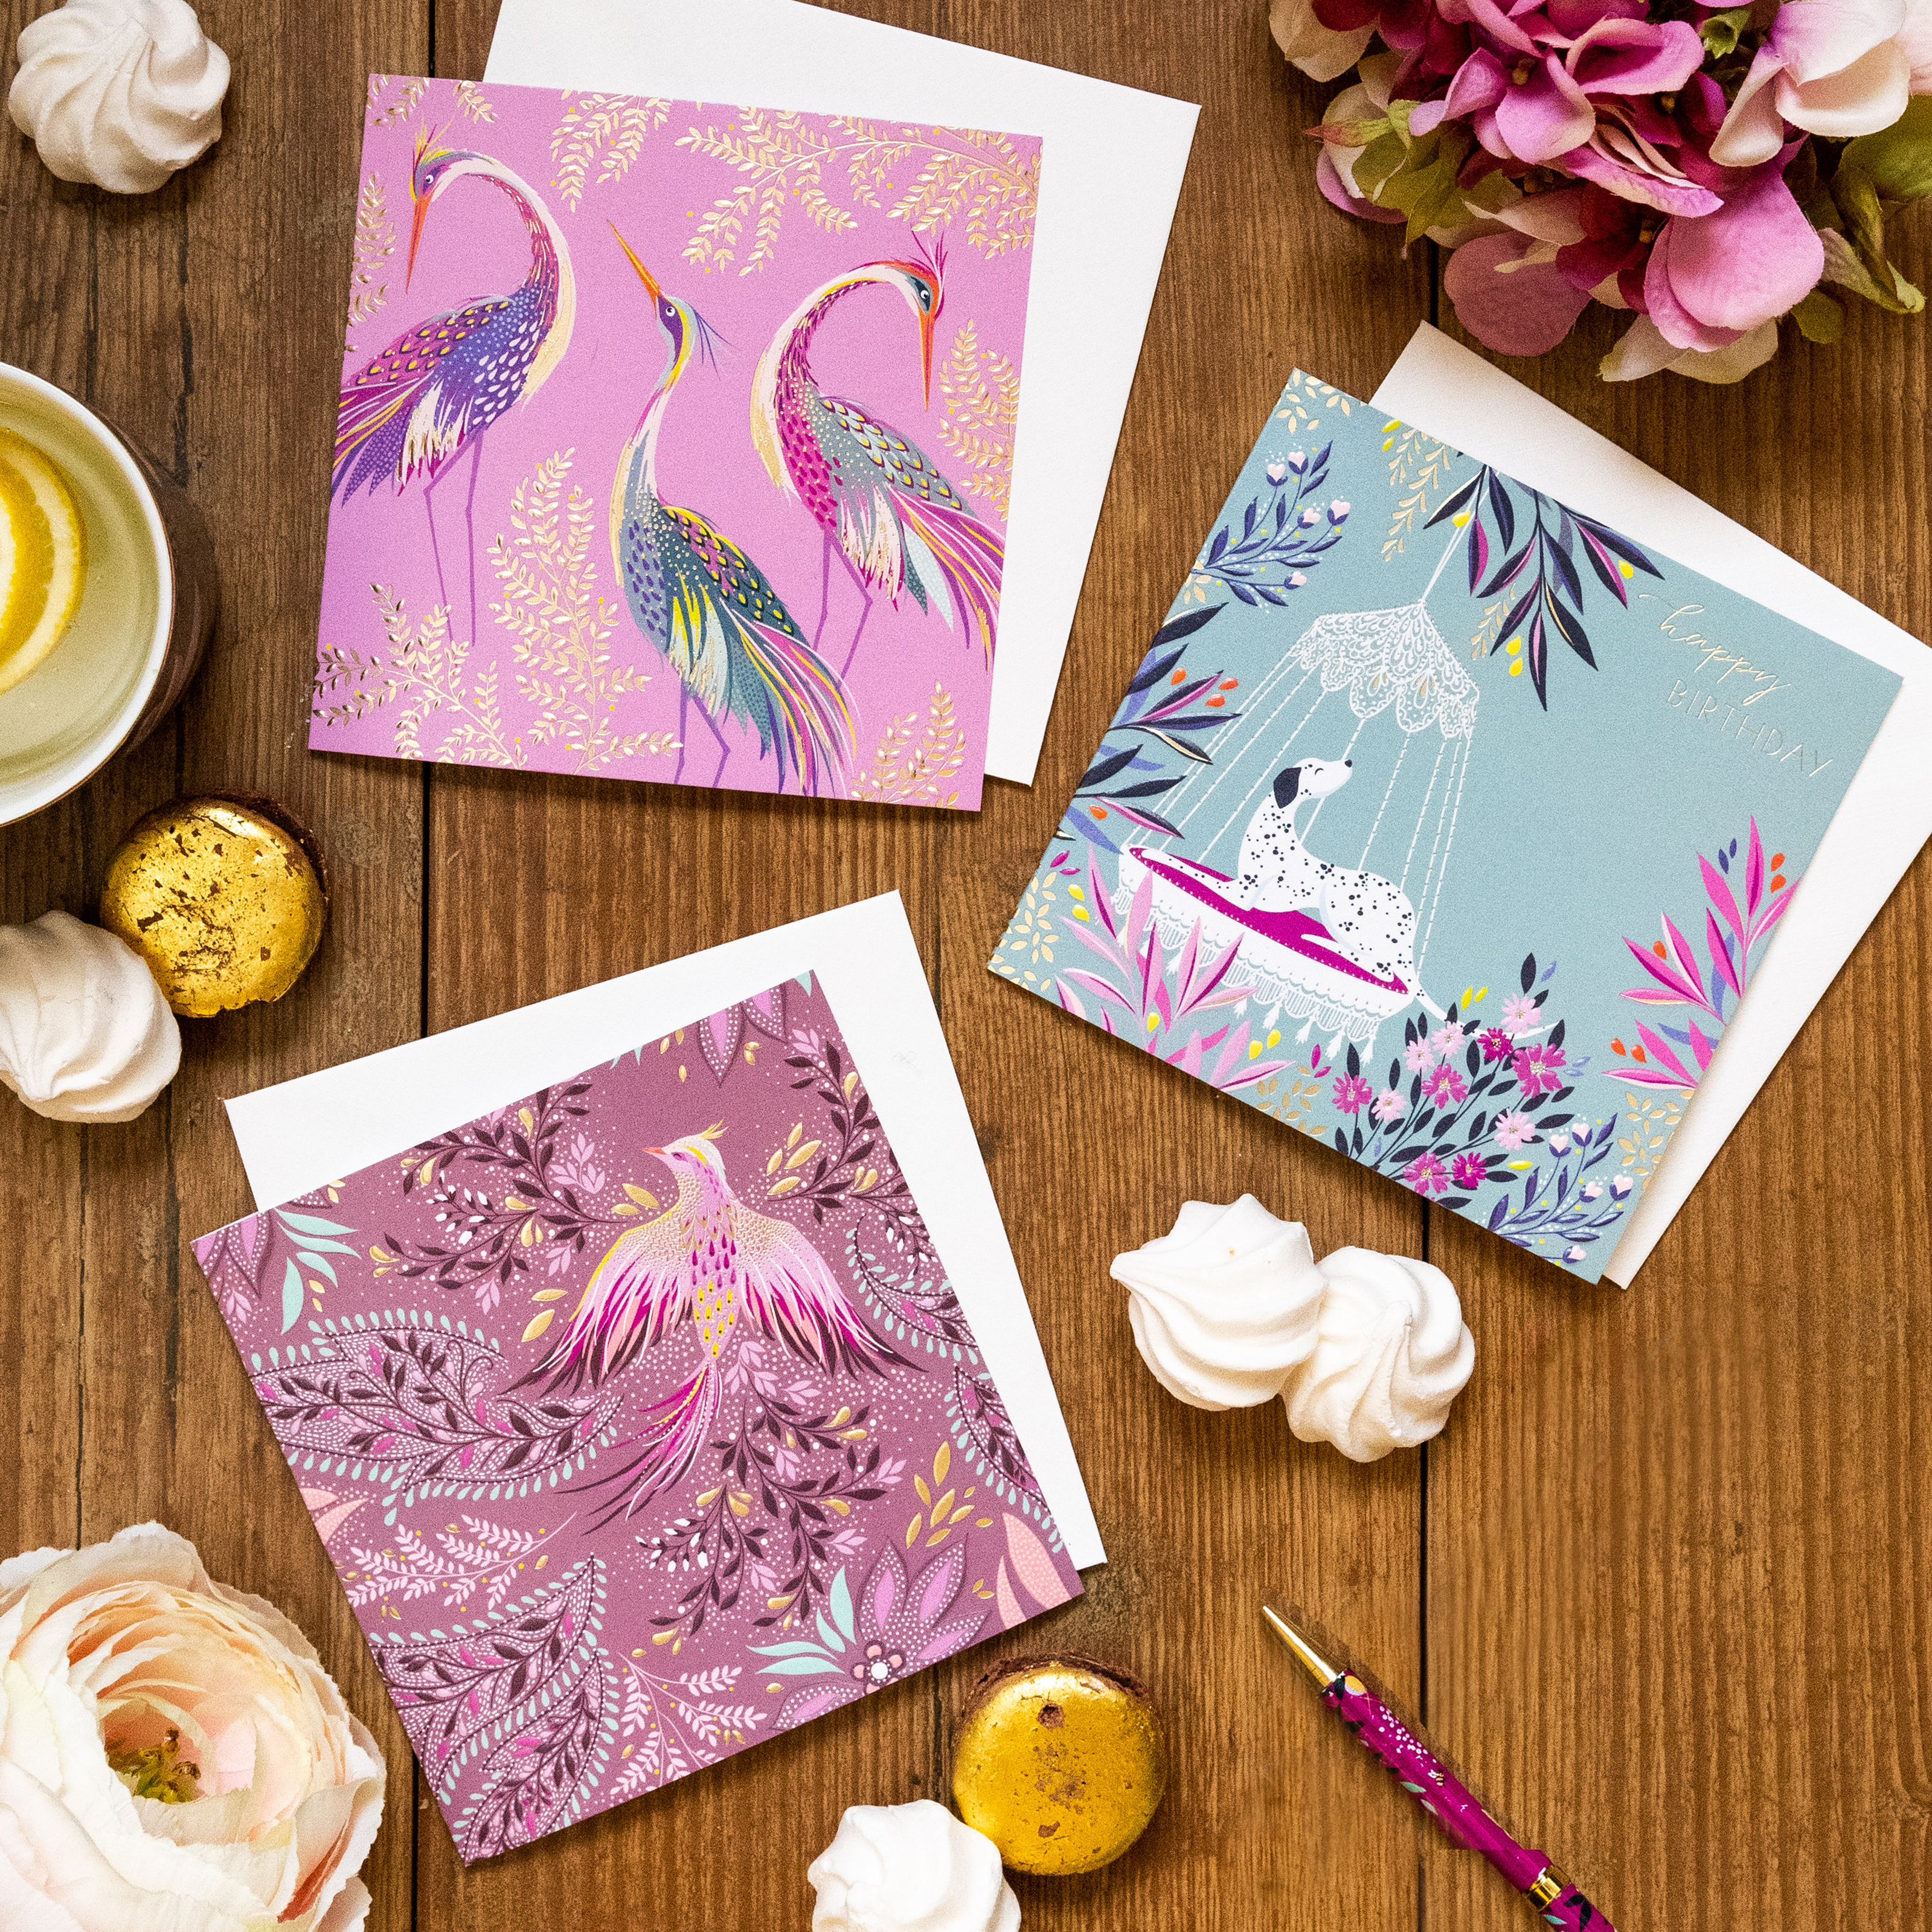 Above: Colourful Sara Miller London cards from The Art File